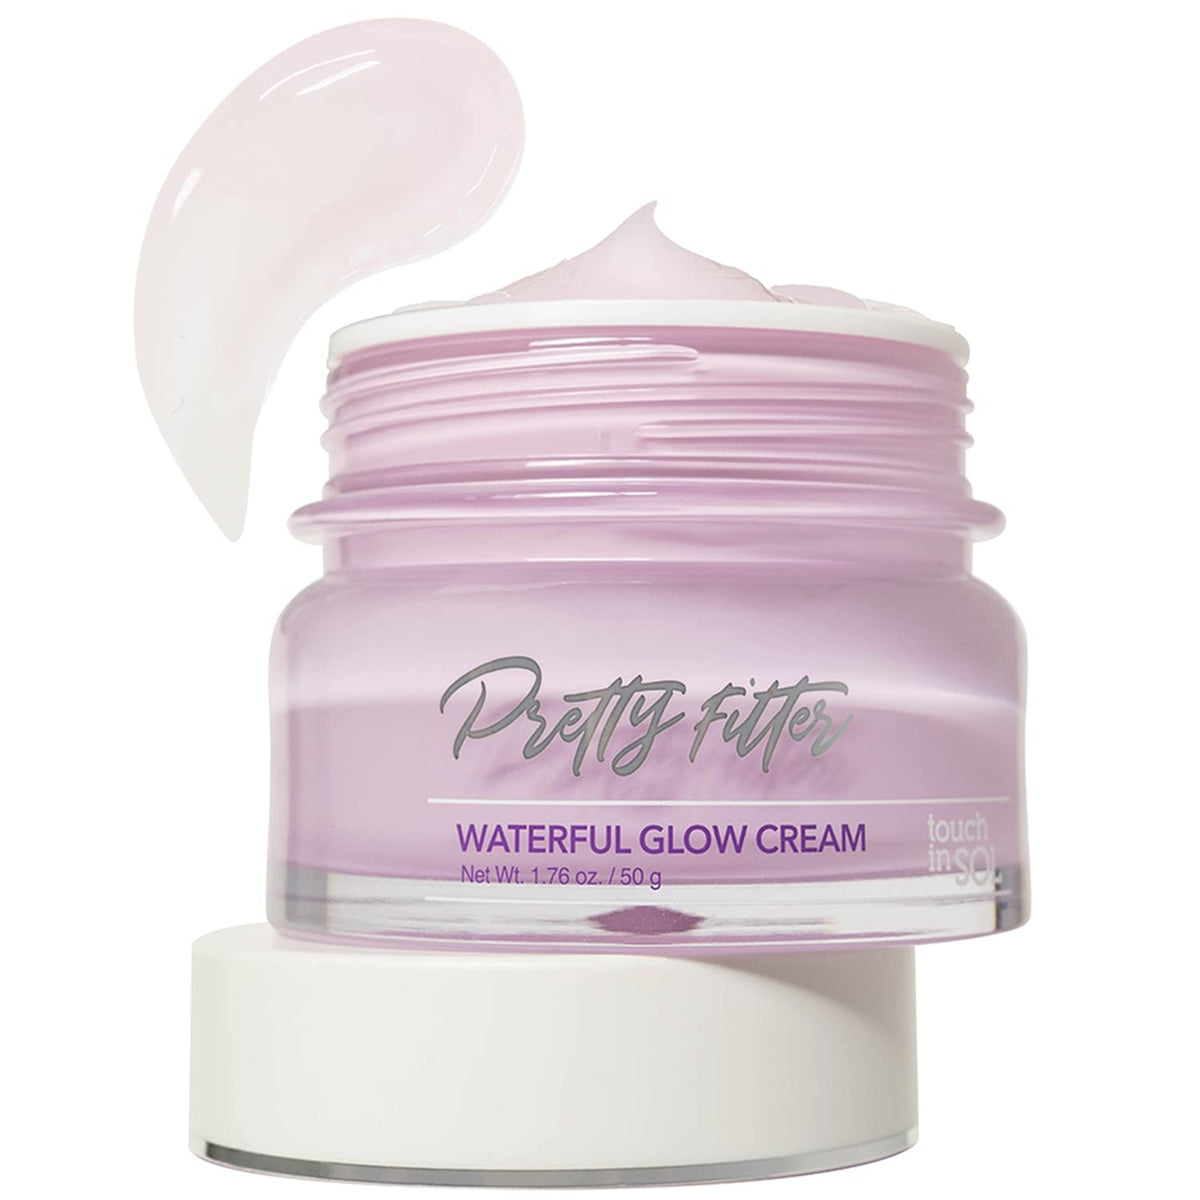 Touch In Sol Pretty Filter Waterful Glow Cream, 50g